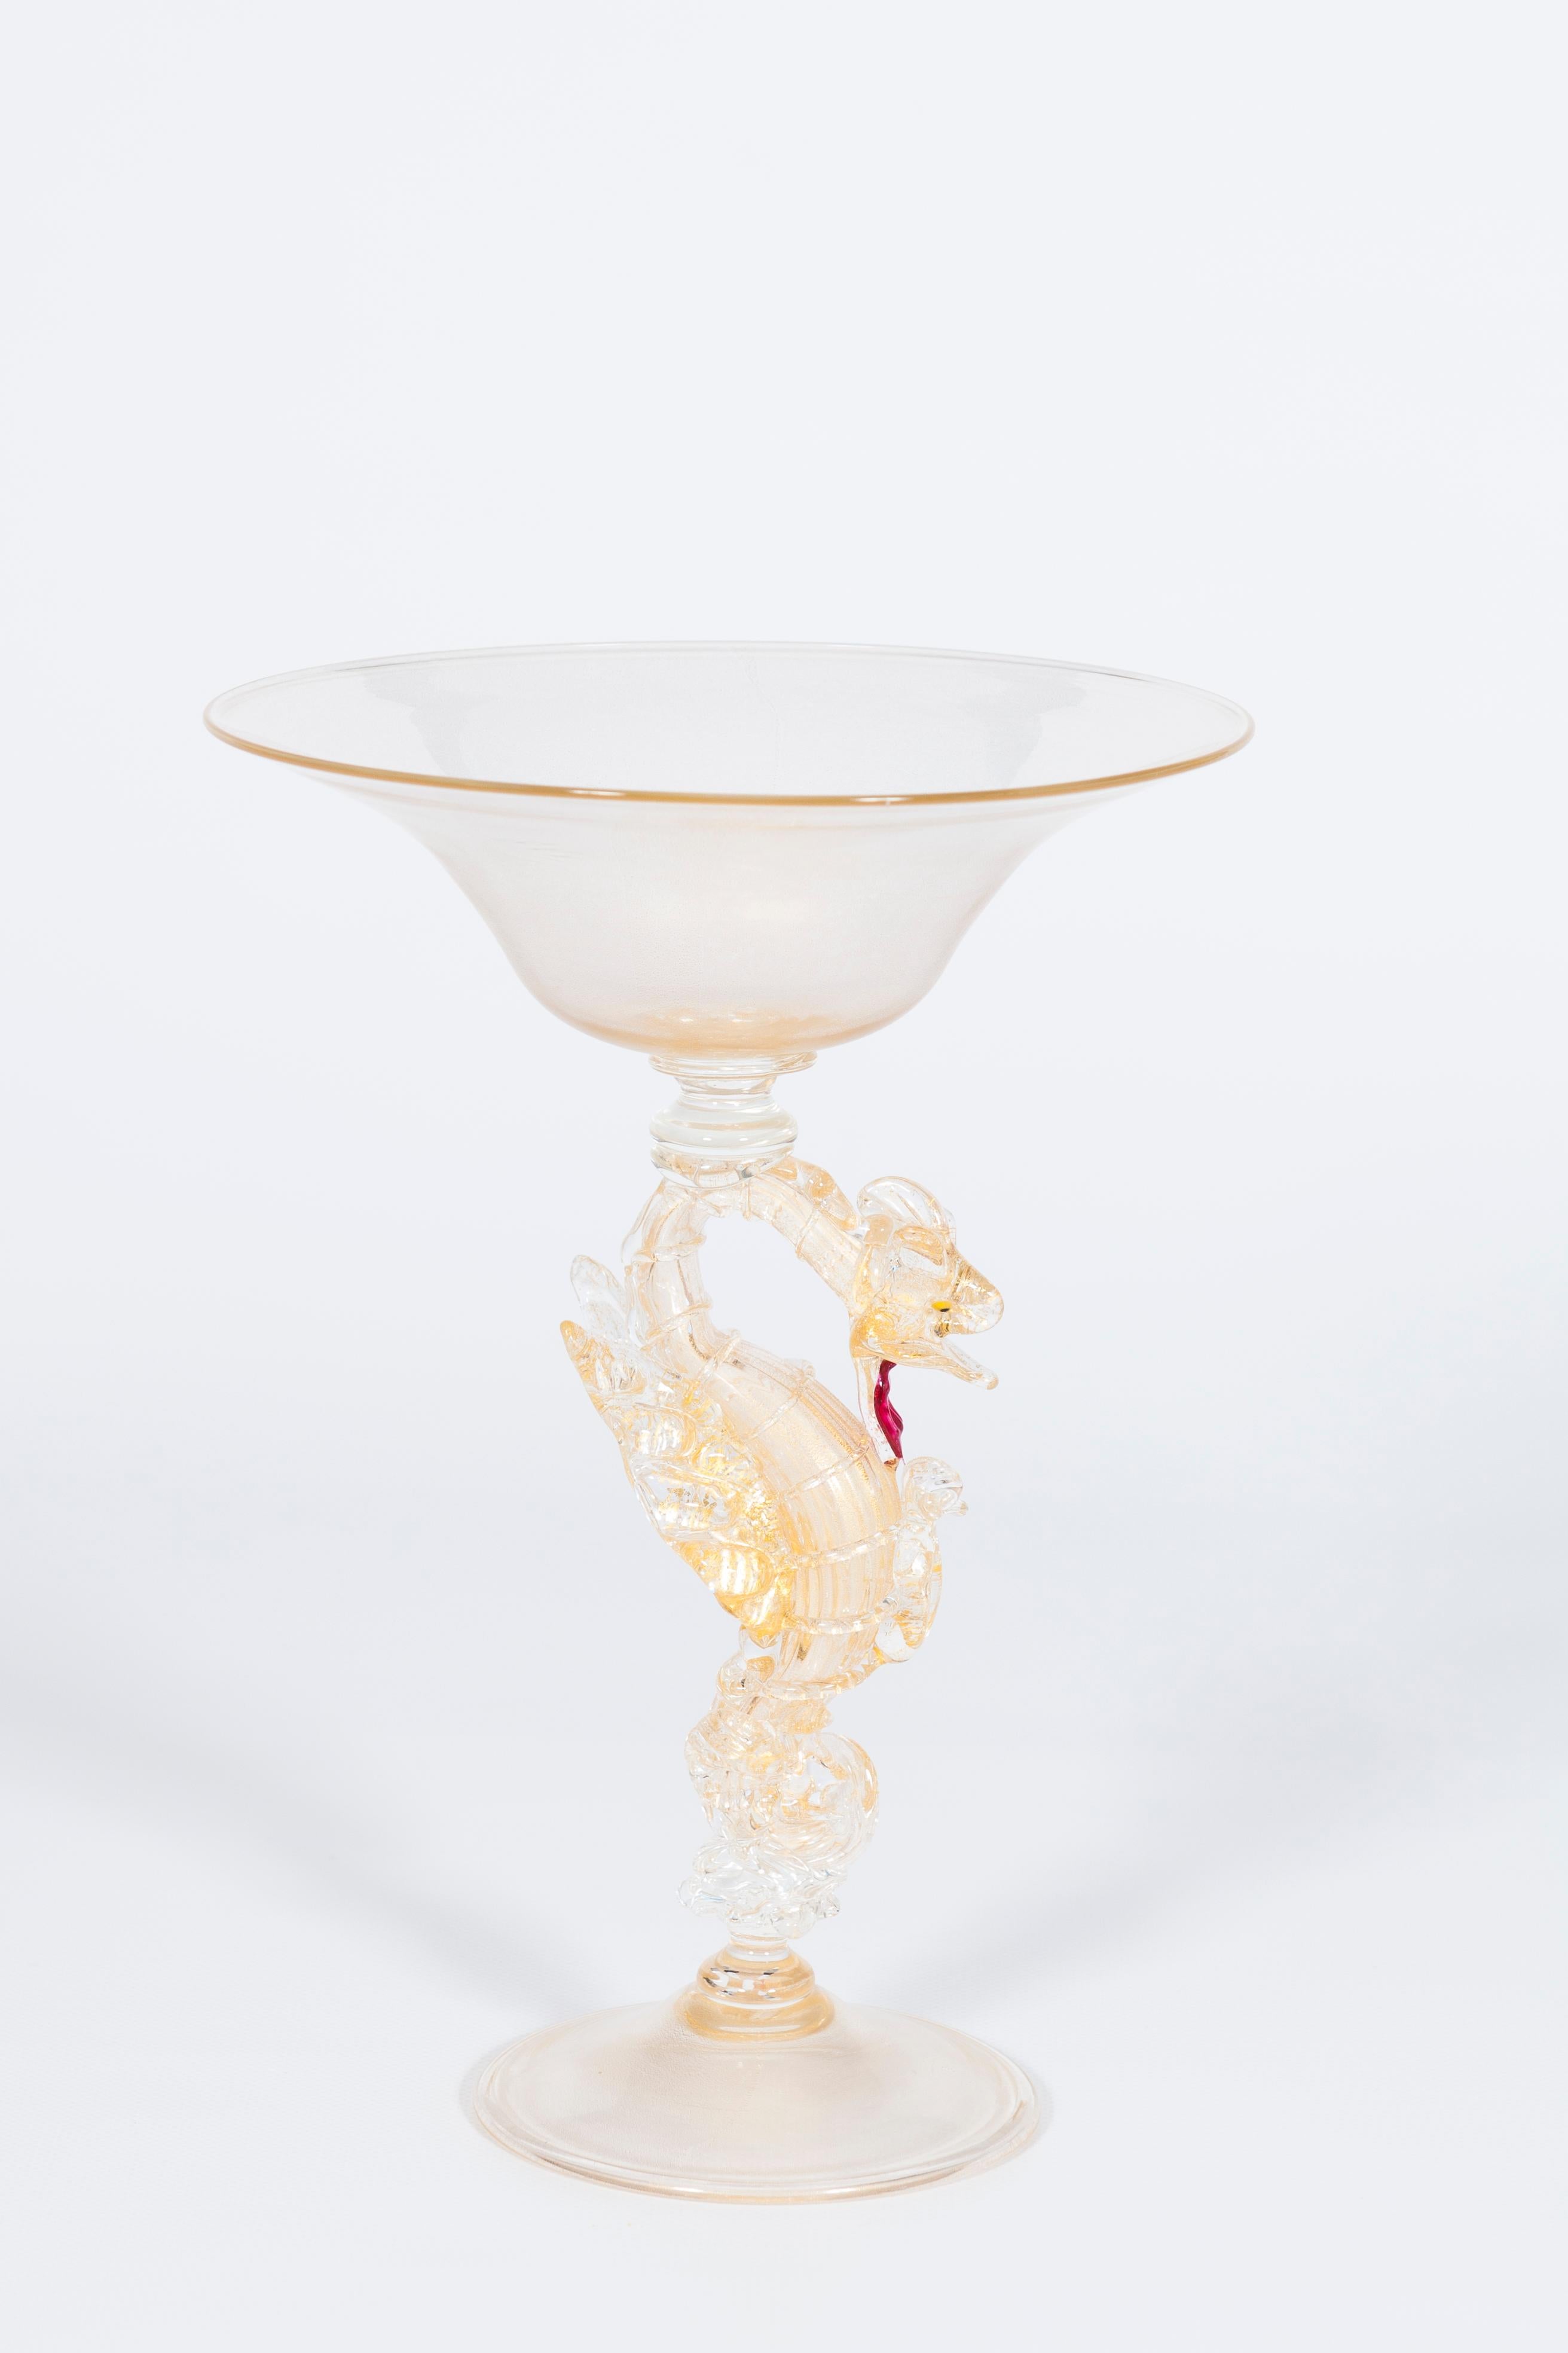 Italian Golden Dragon Footed Bowl in Clear Murano Glass and Gold Leaf Venice Italy 1970s For Sale